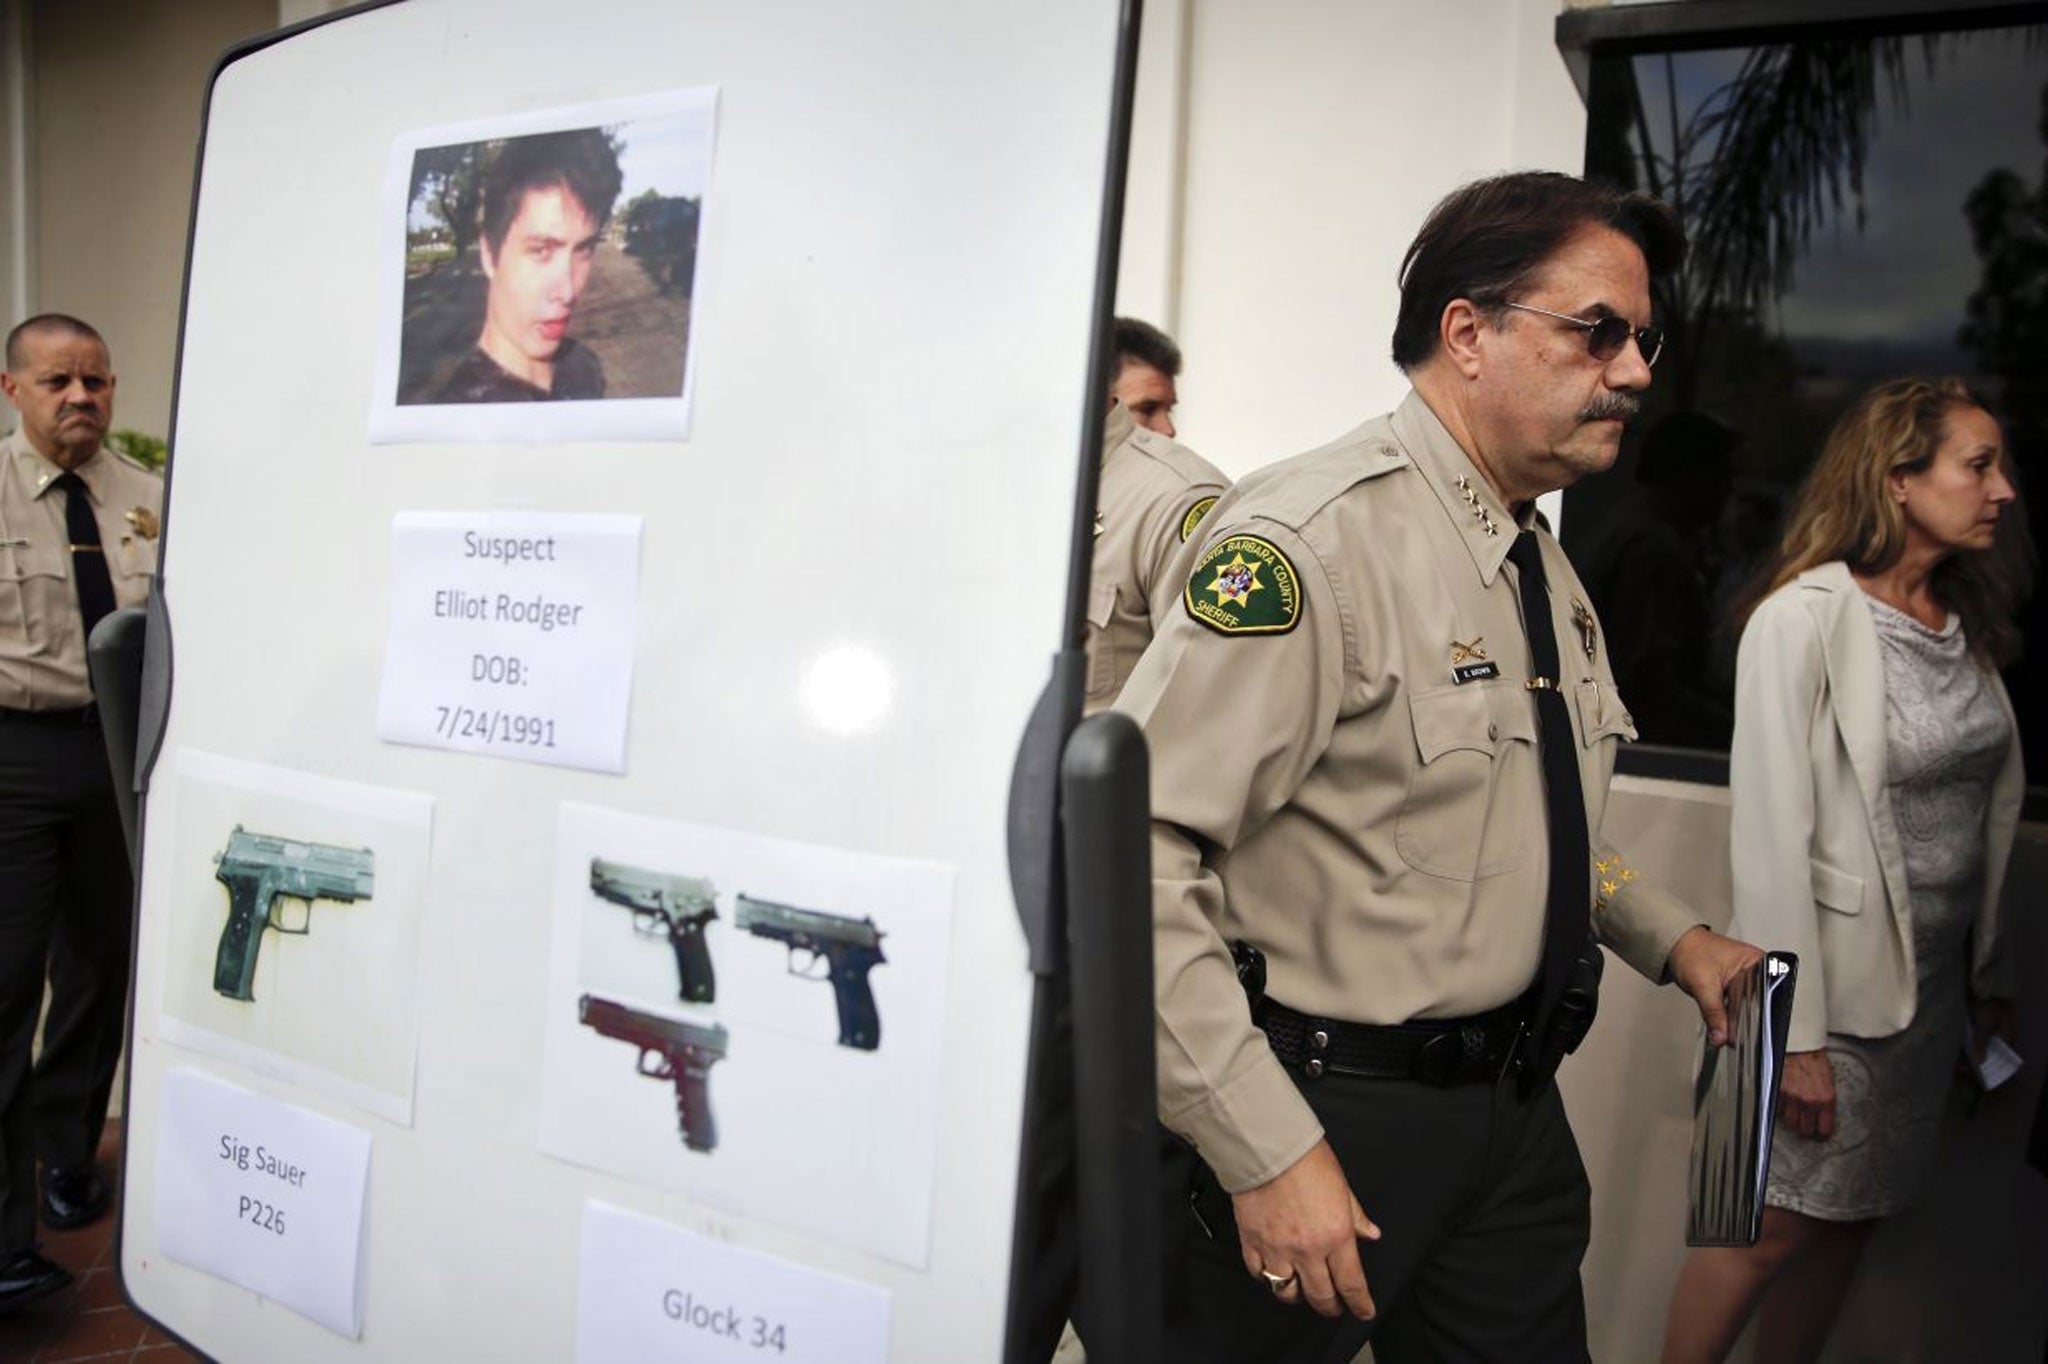 Santa Barbara County Sheriff Bill Brown, right, walks past a board showing the photos of suspected gunman Elliot Rodger and the weapons he used in Friday night's mass shooting